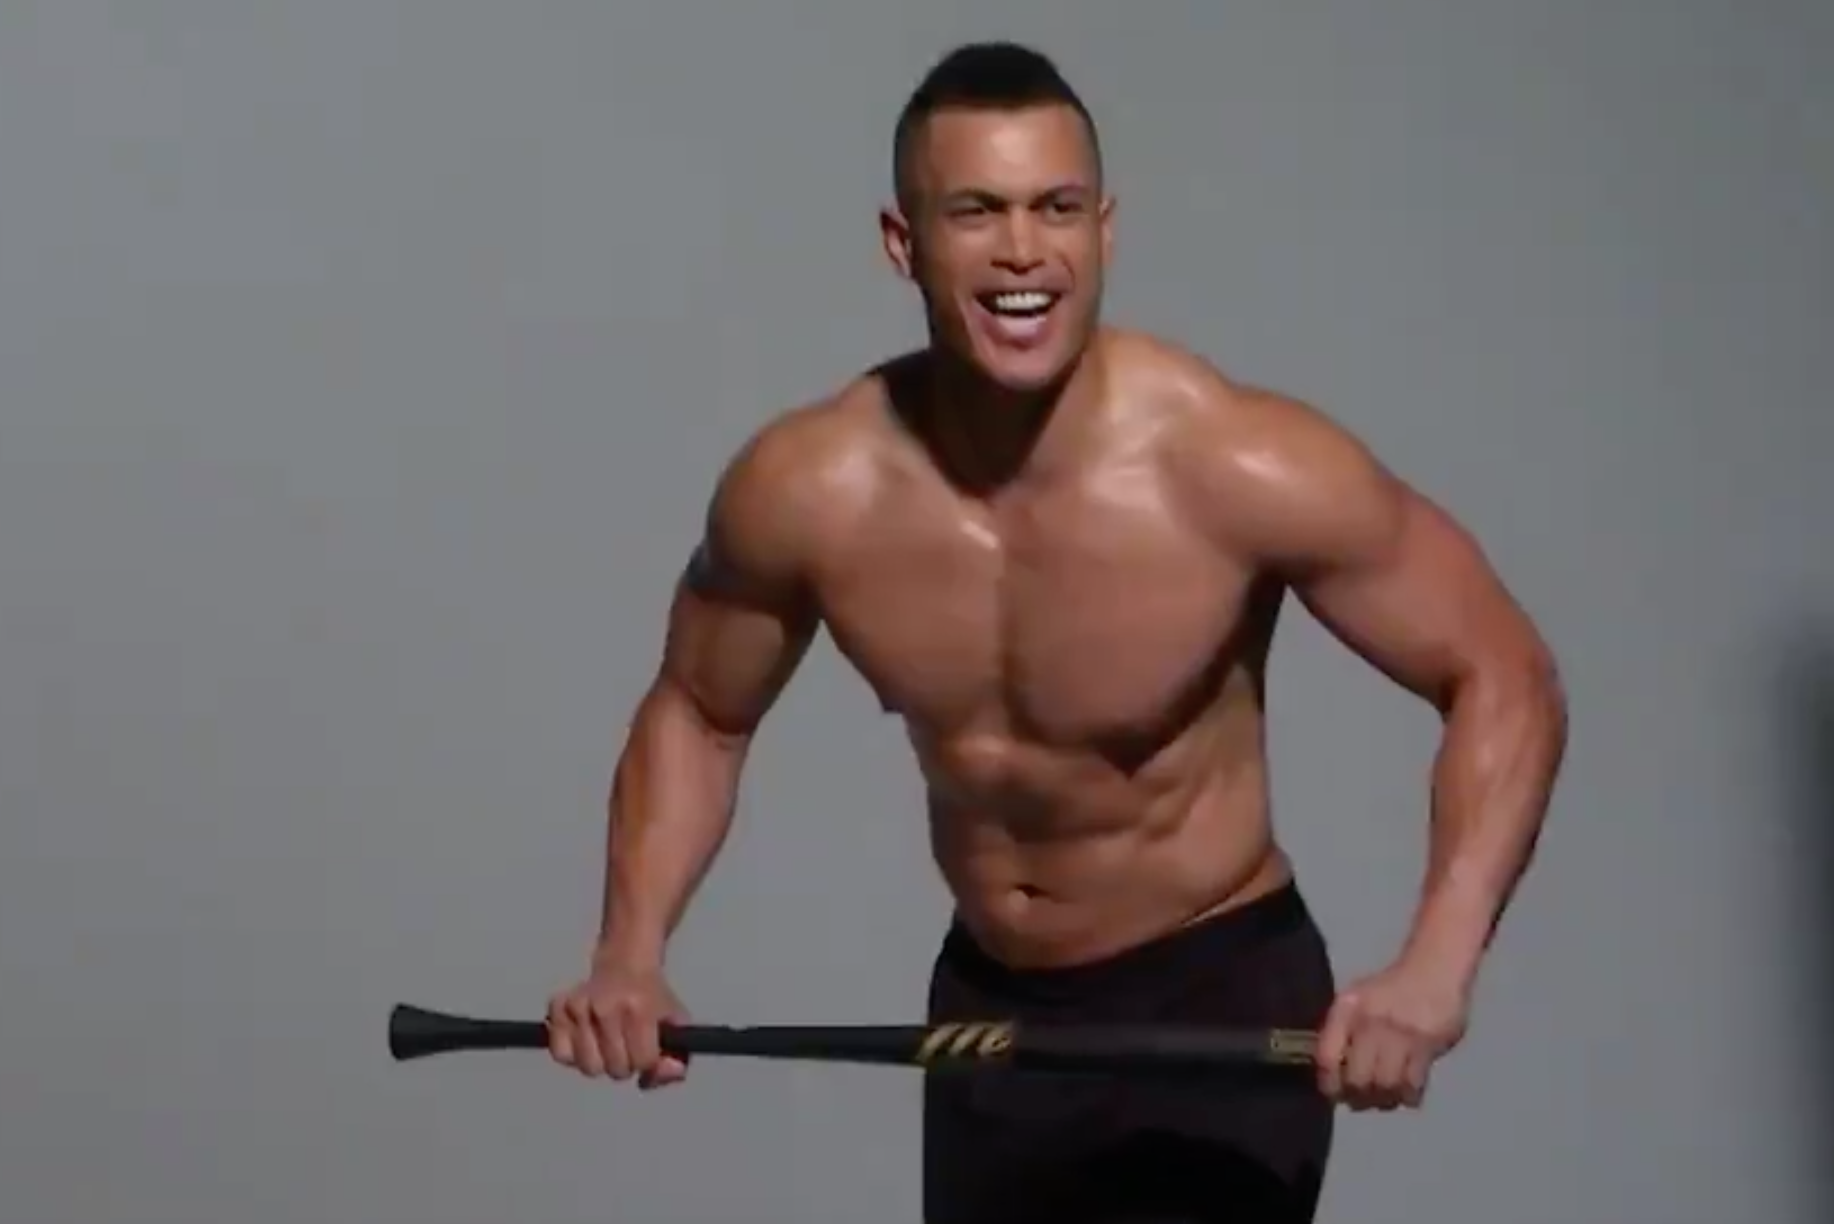 Giancarlo Stanton shows how ripped he is in Men's Health photo